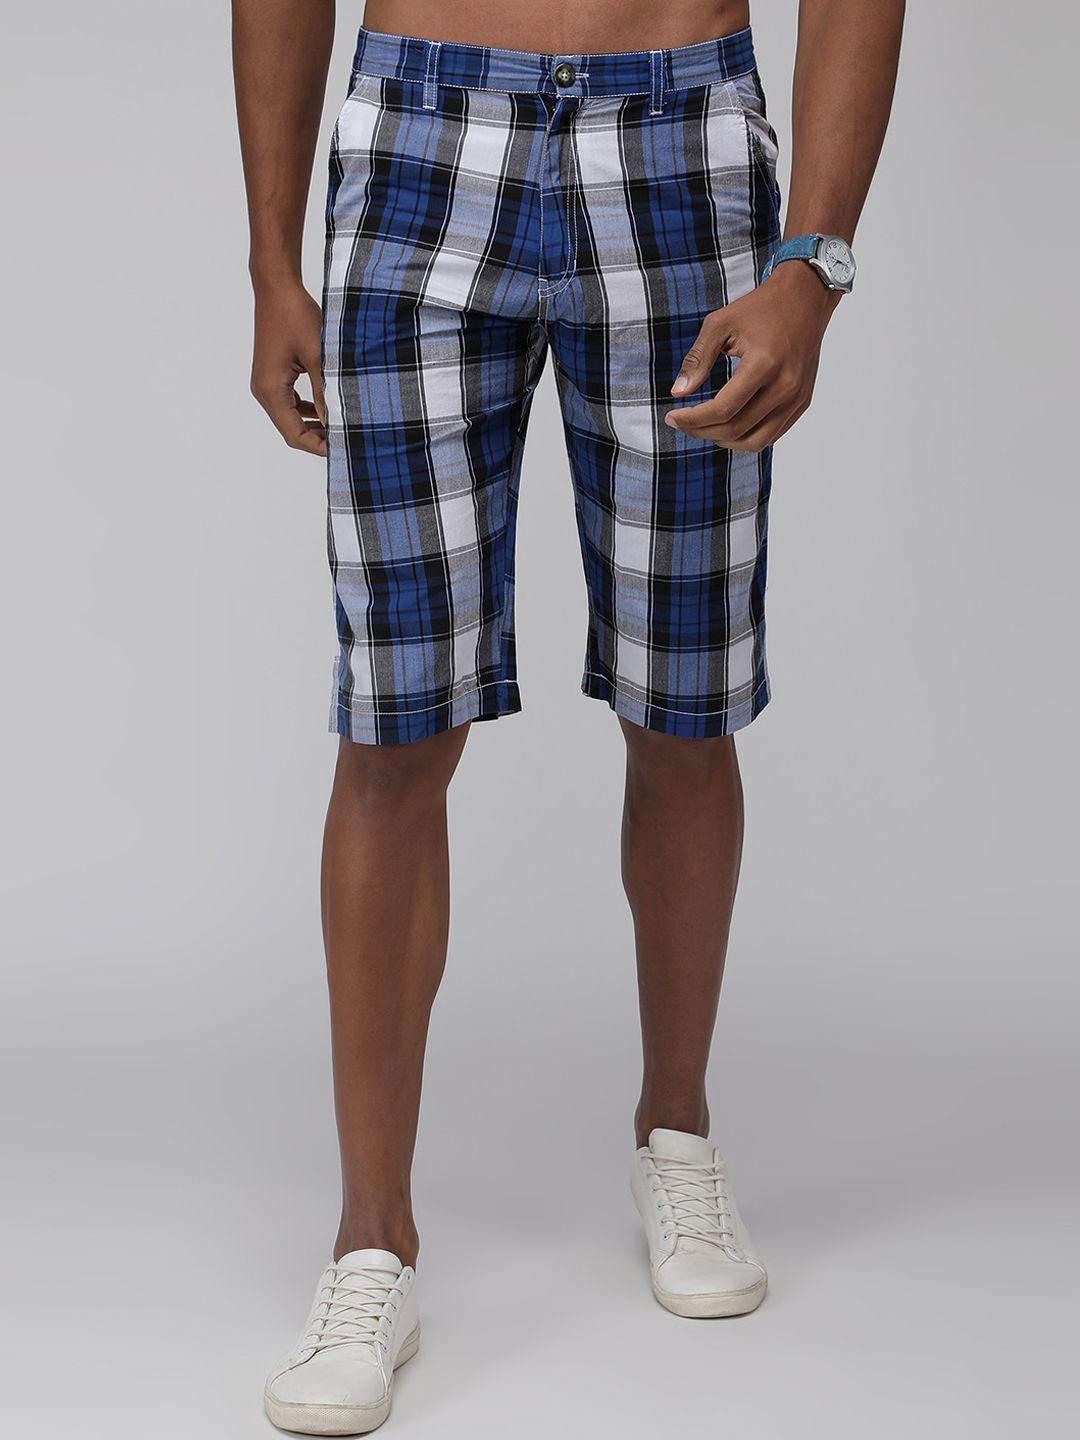 sporto men navy blue checked outdoor with technology shorts